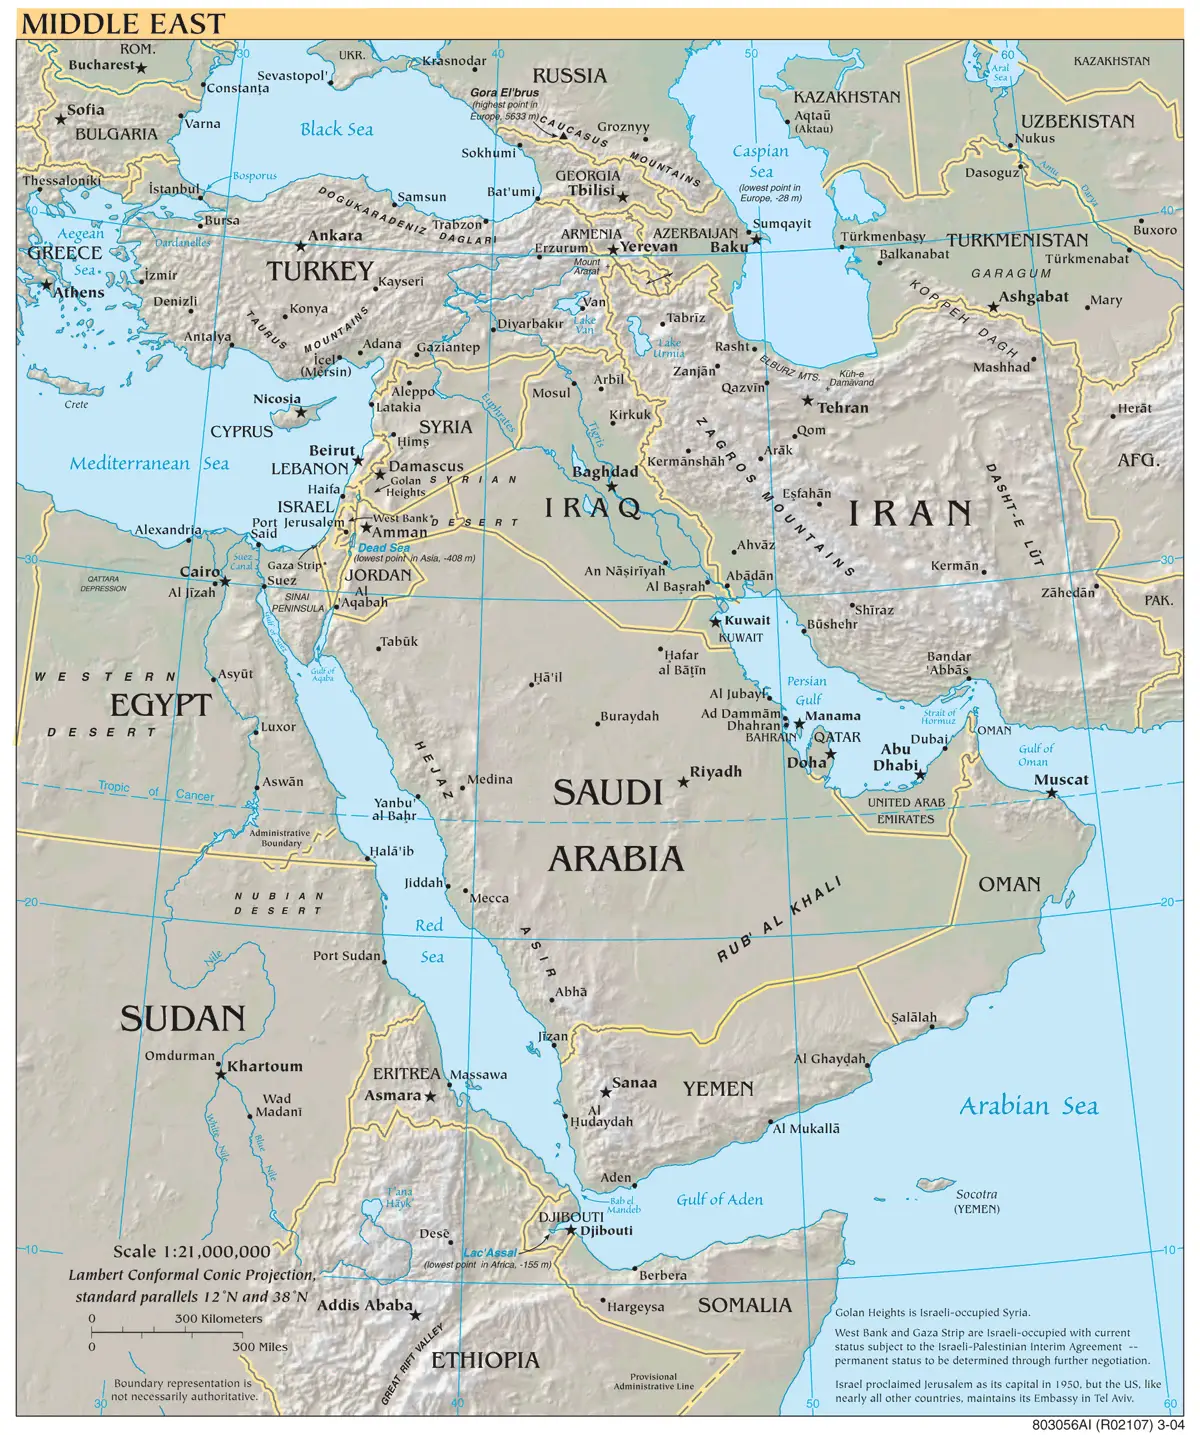 Middle East Reference Map